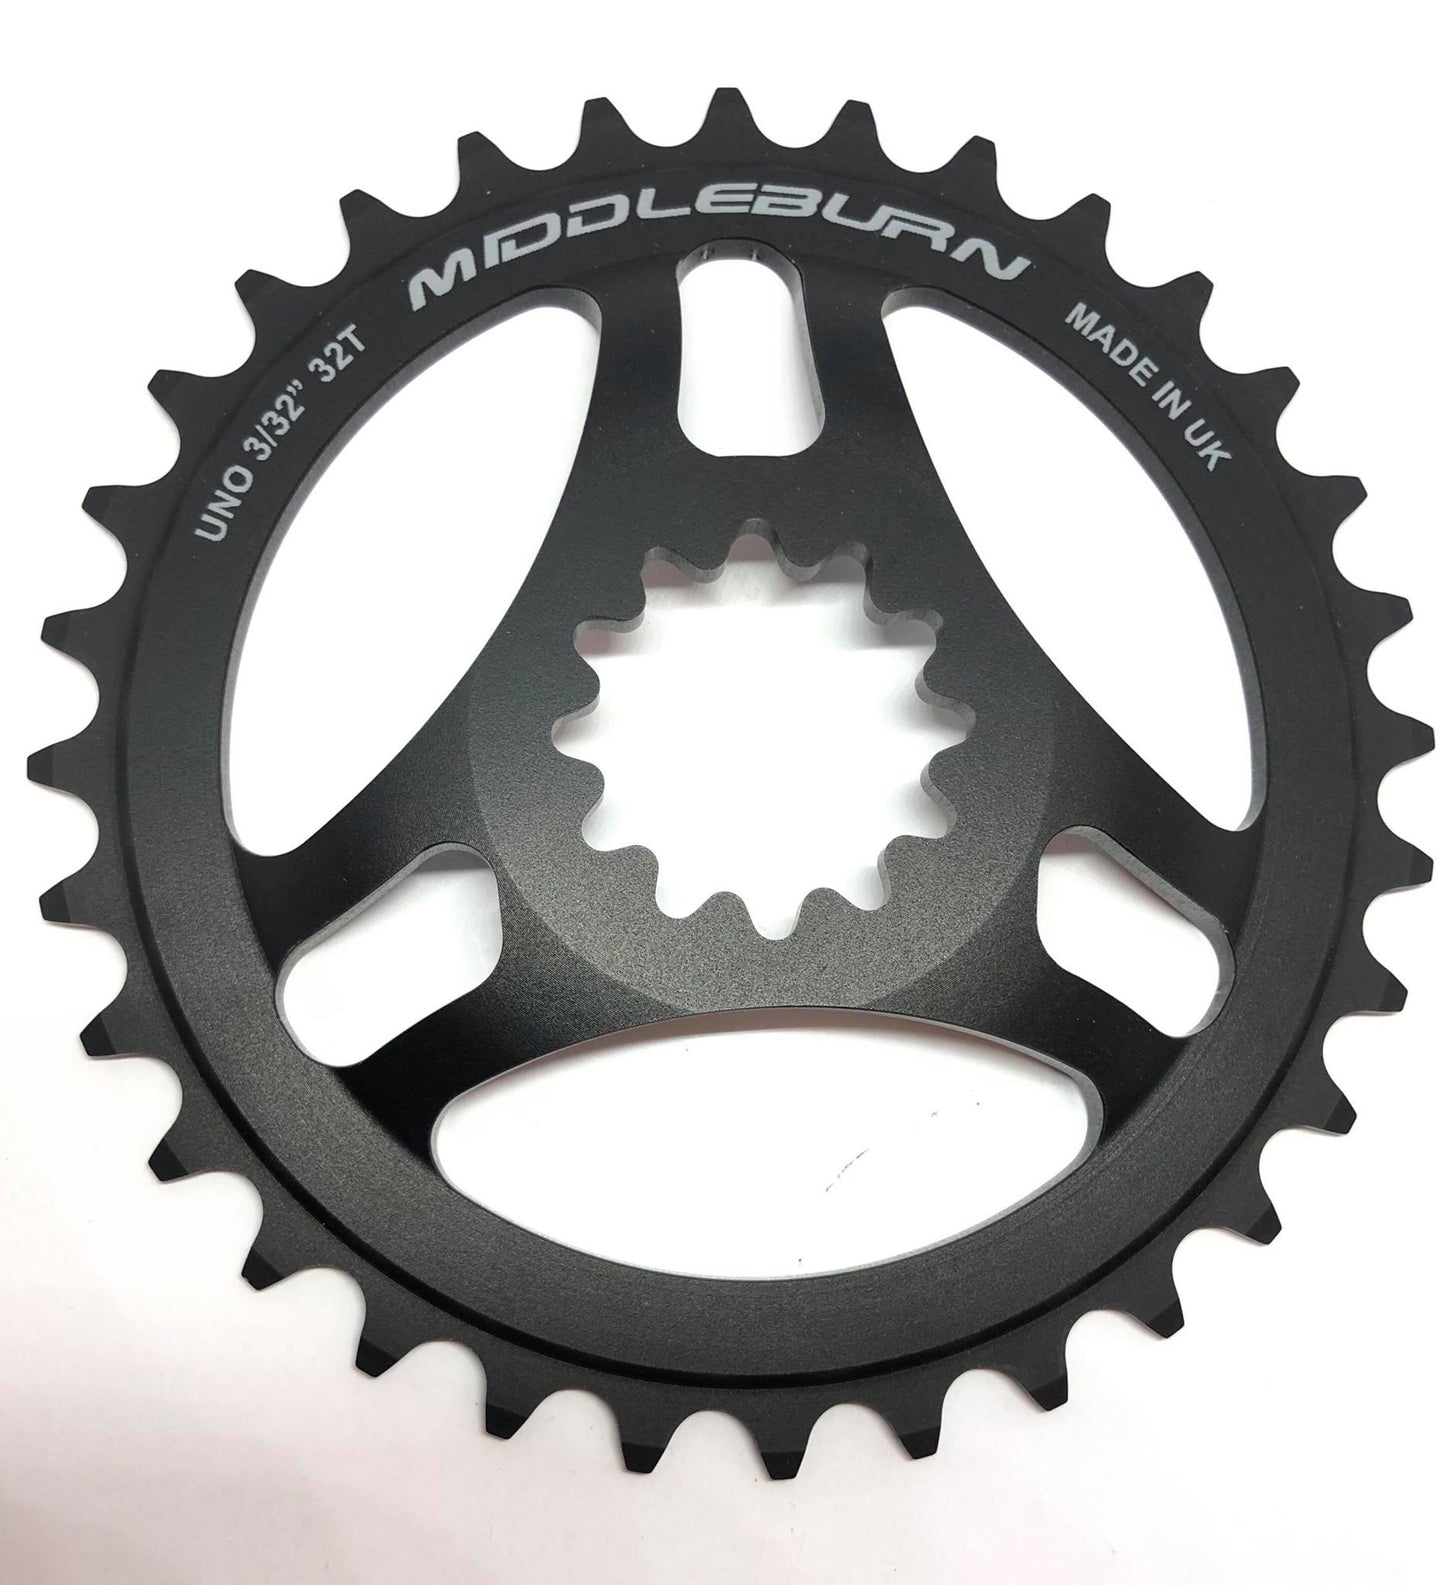 Middleburn SP-X-UNO-332-32-HC Chainring